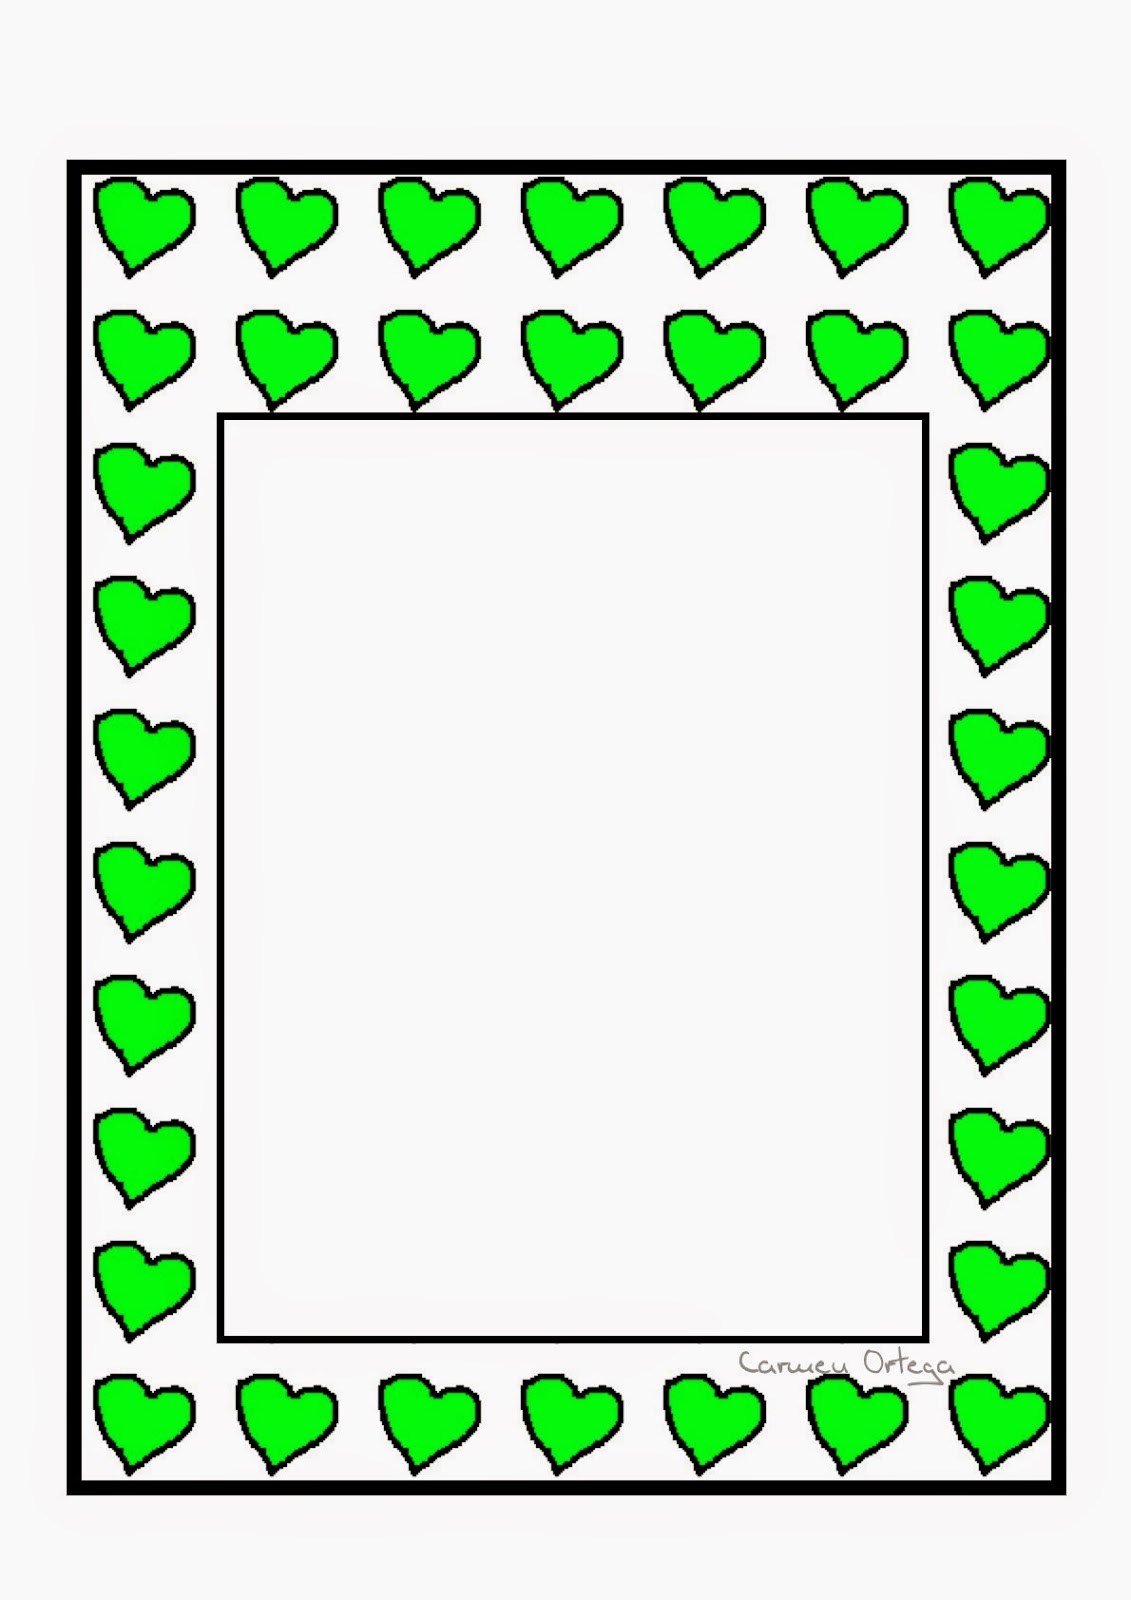 Free Printable Wedding Borders or Frames with Hearts in Neon. Oh My